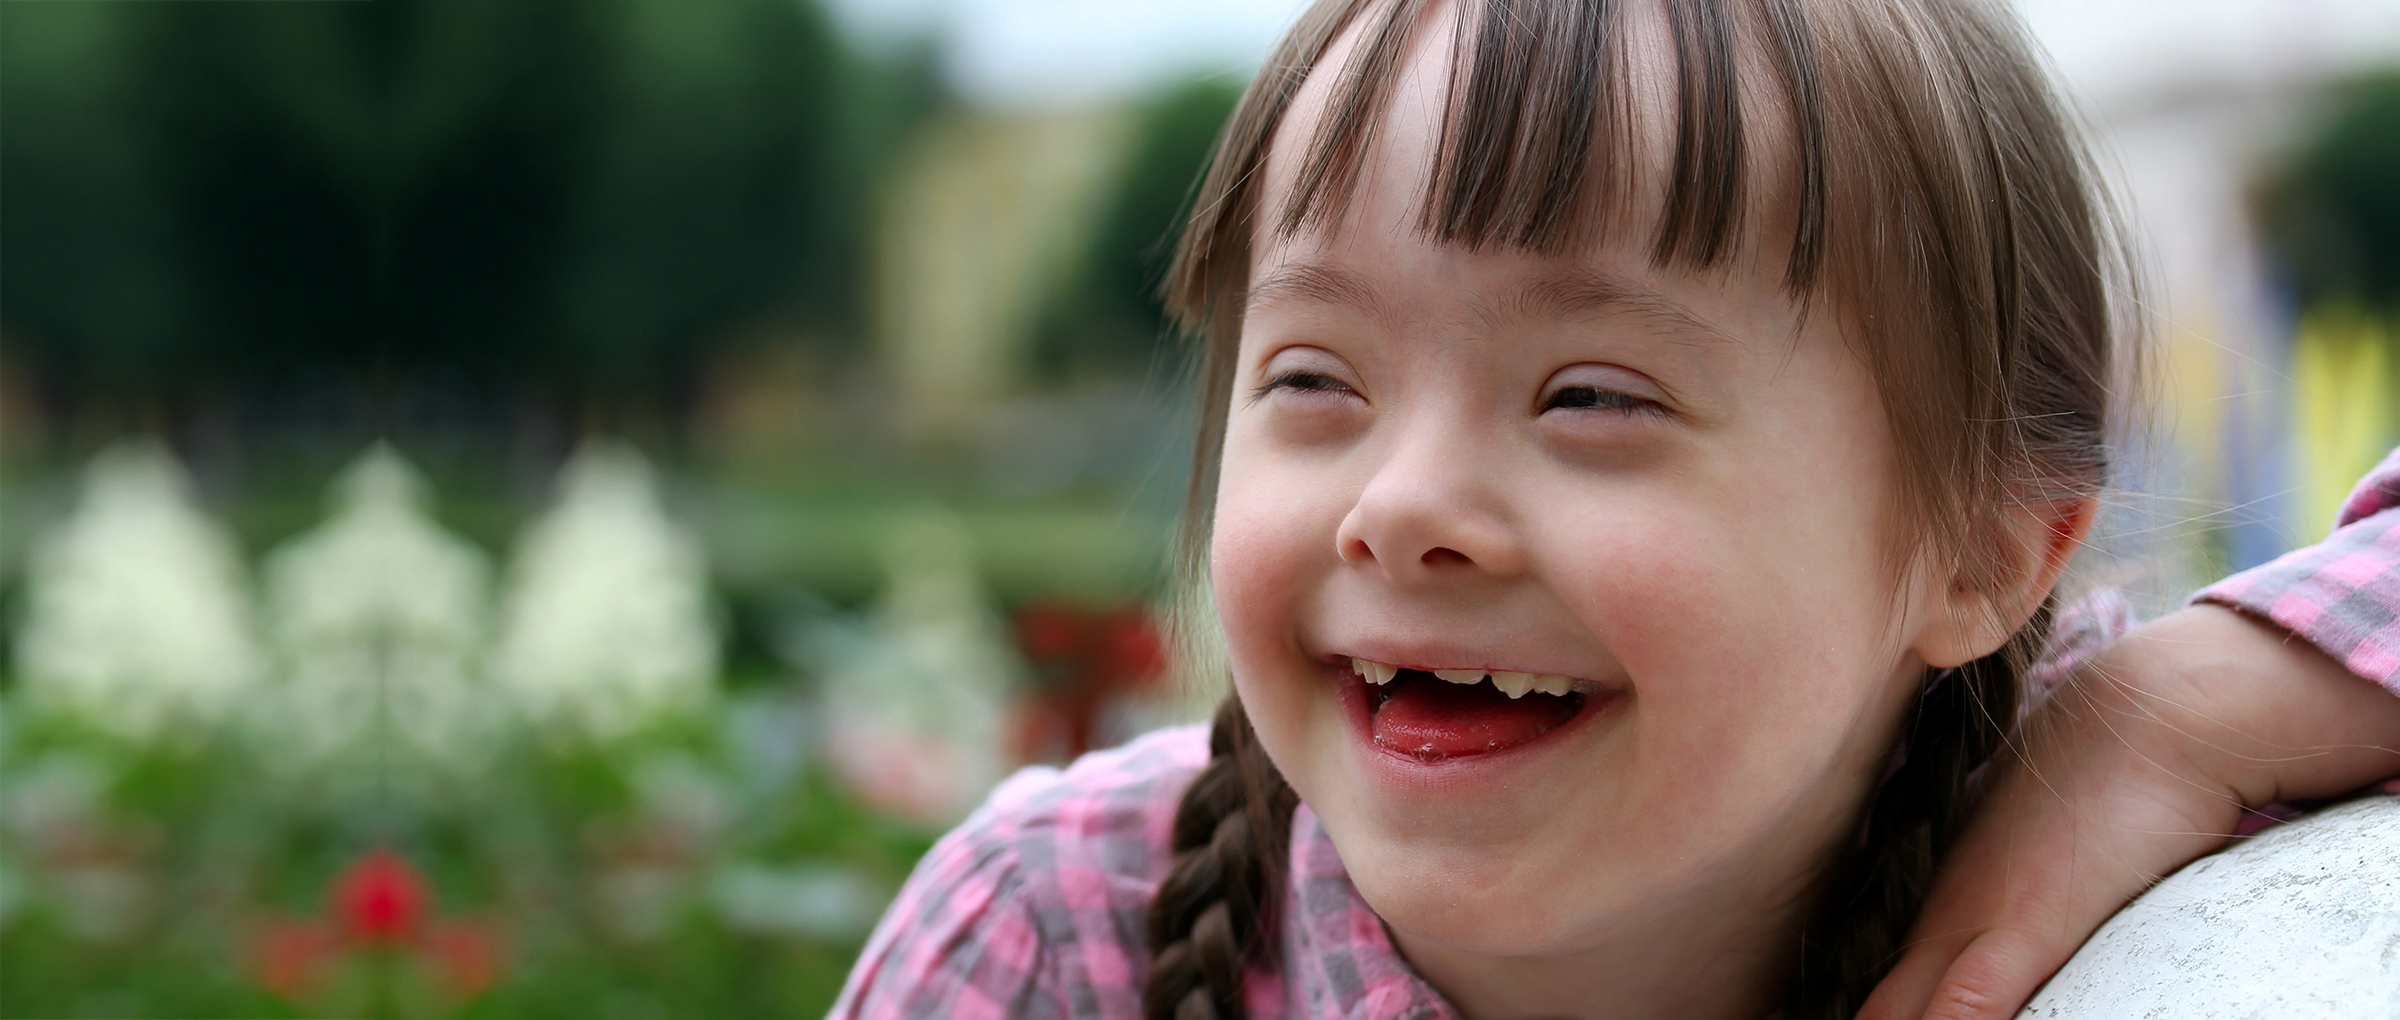 Chromosomal alterations such as Down syndrome